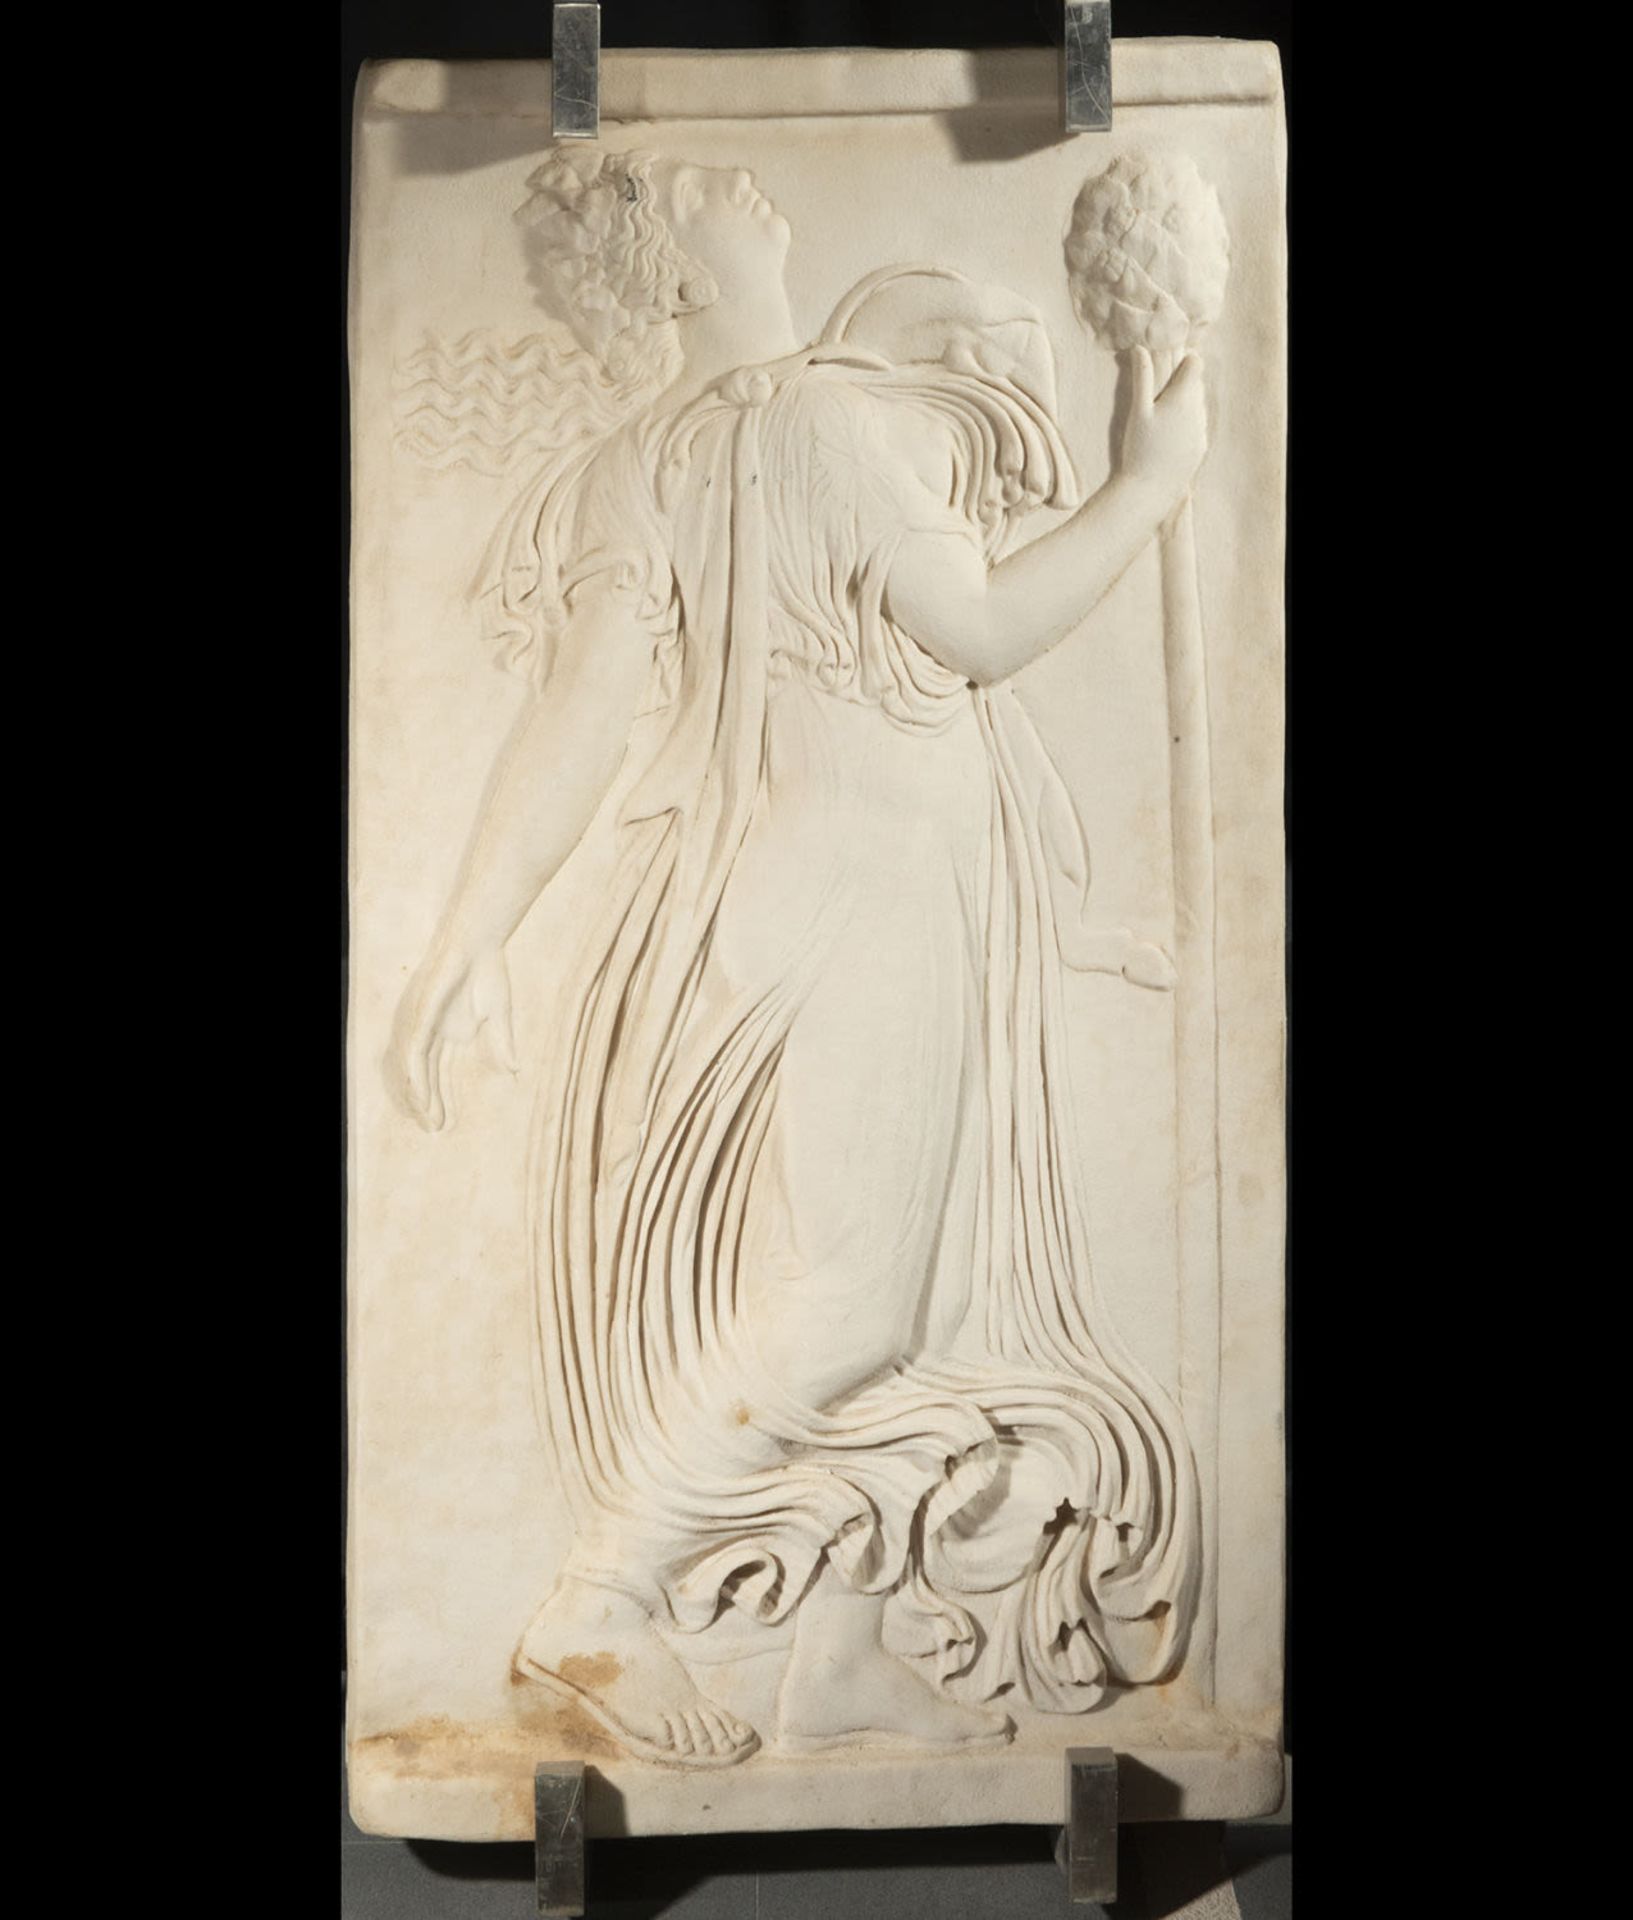 Pair of Large Reliefs in Neoclassical taste, Enrique Orejudo Alonso, 20th century